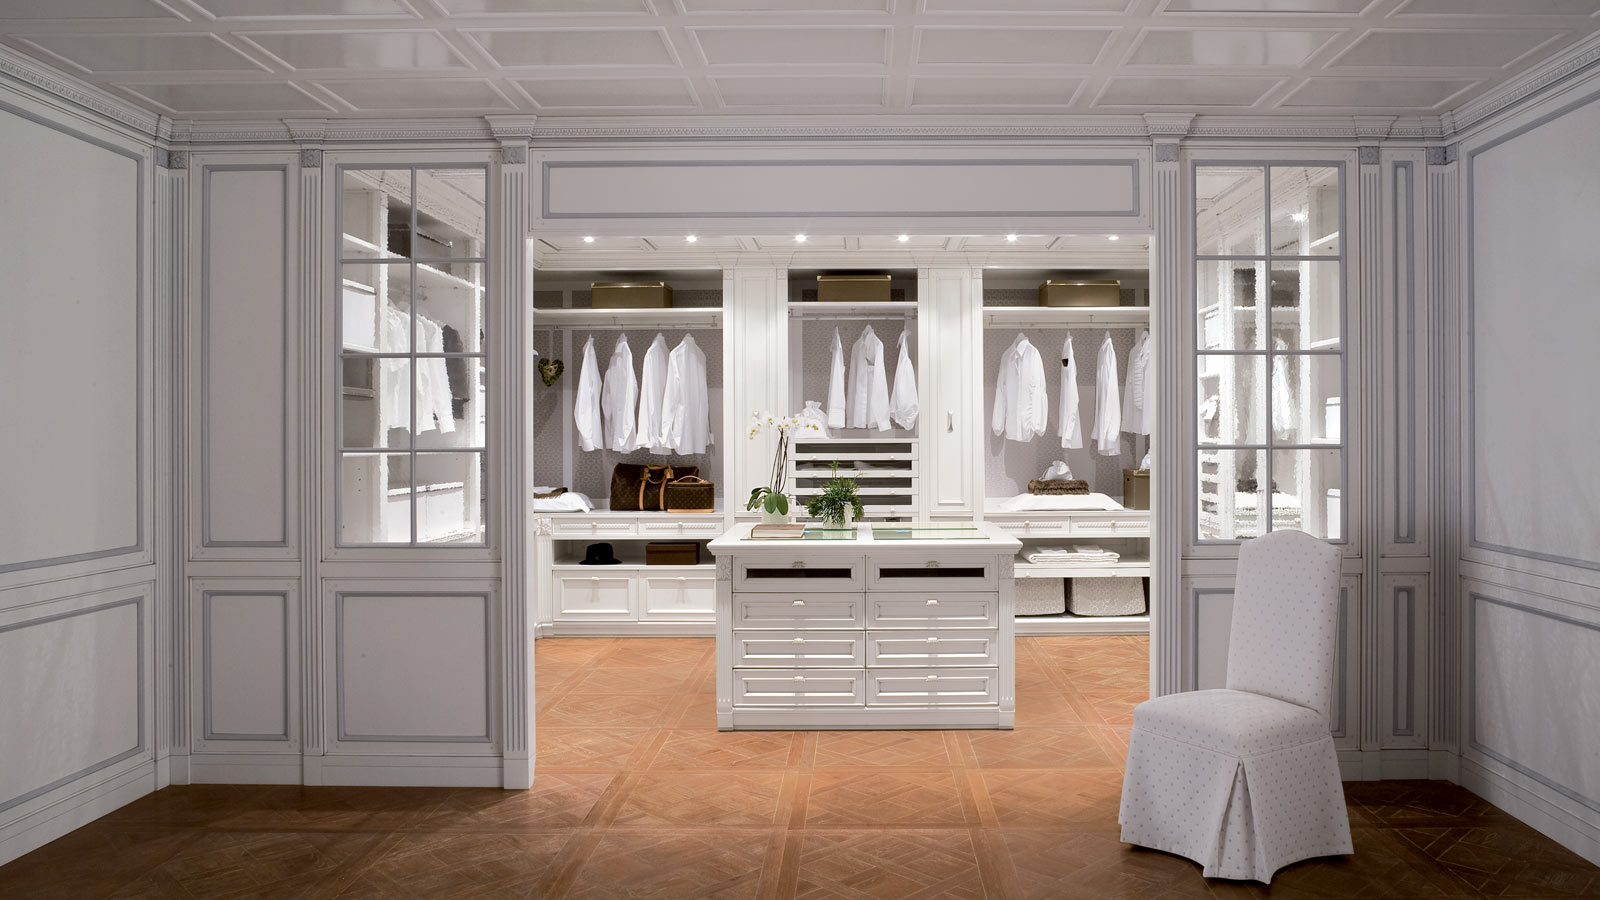 White Contemporary Closet Breathtaking White Contemporary Walk In Closet Ideas With Ceiling Lighting Completed By Clothes Rack And Cabinets Plus Furnished With White Chair Closet Walk In Closet Ideas: Enjoying Private Collection